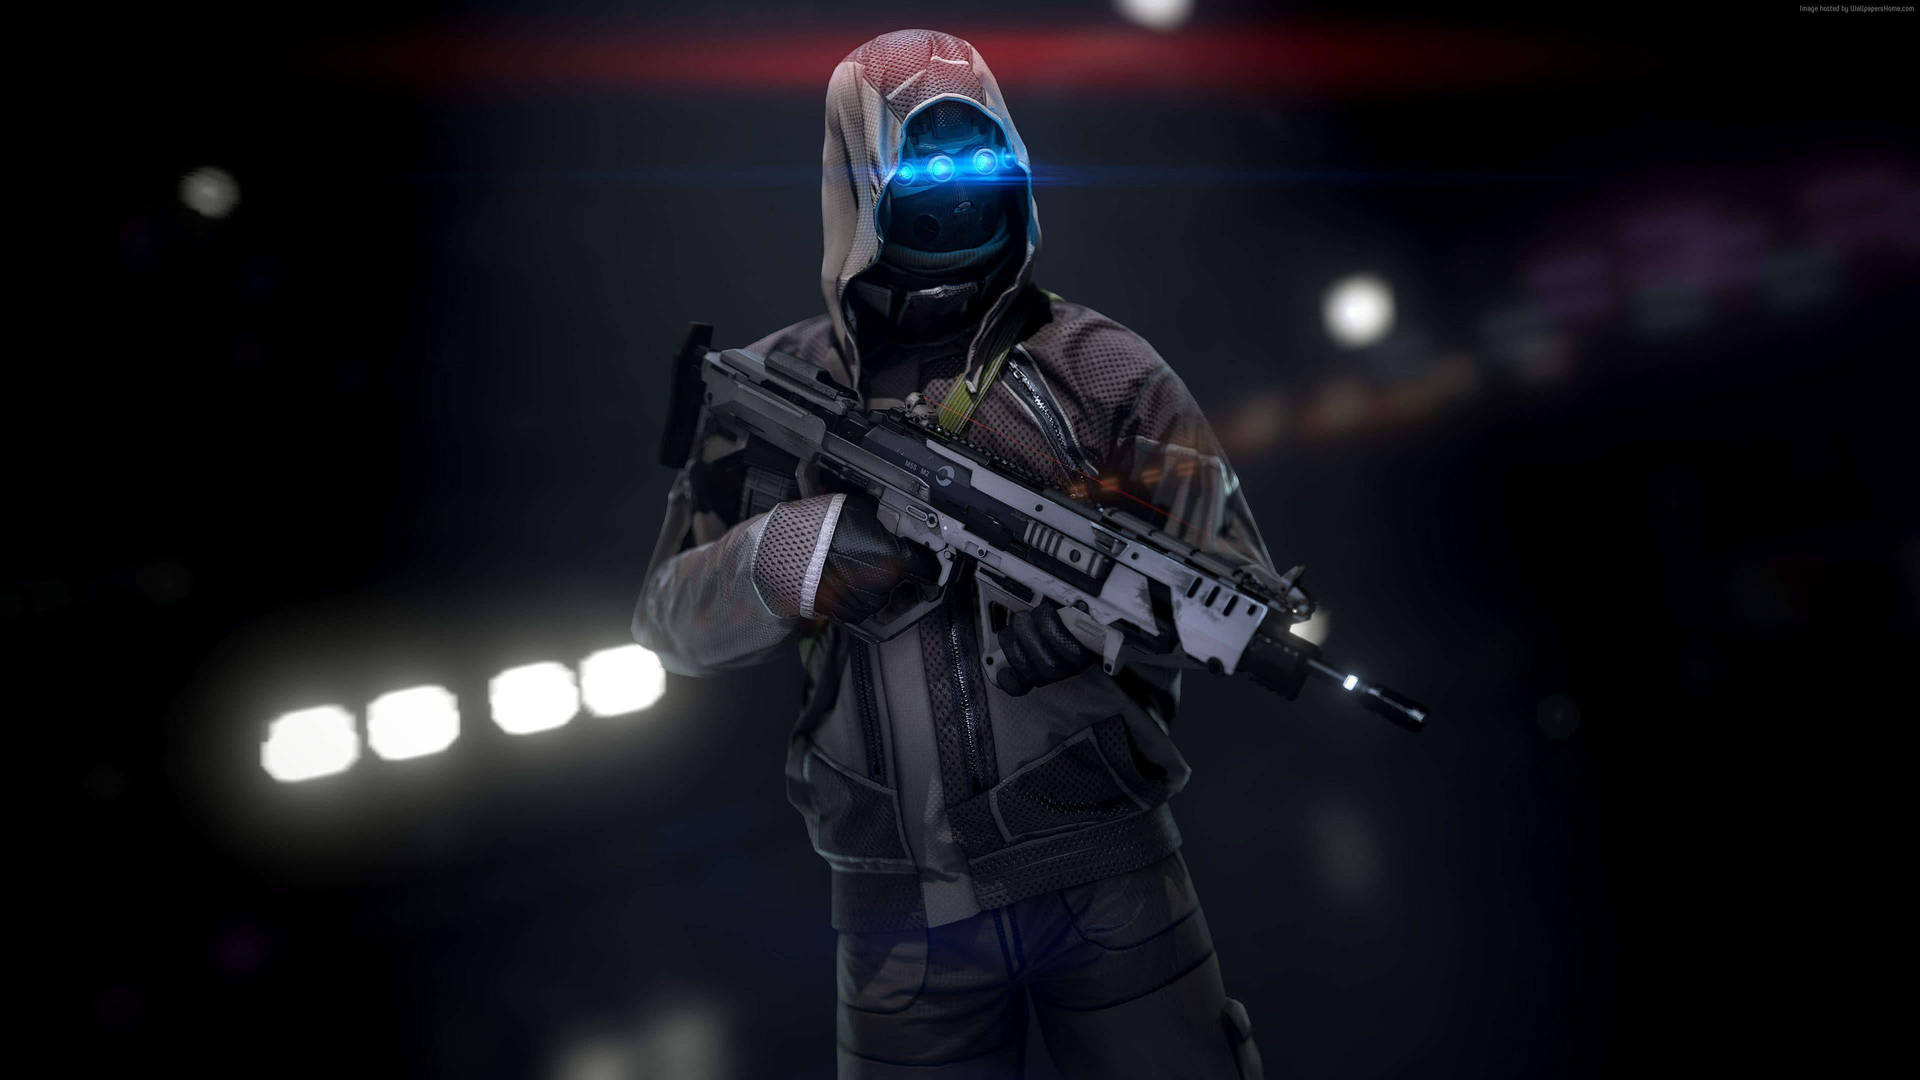 Pubg Hd Hooded Character With Blue Lights Background